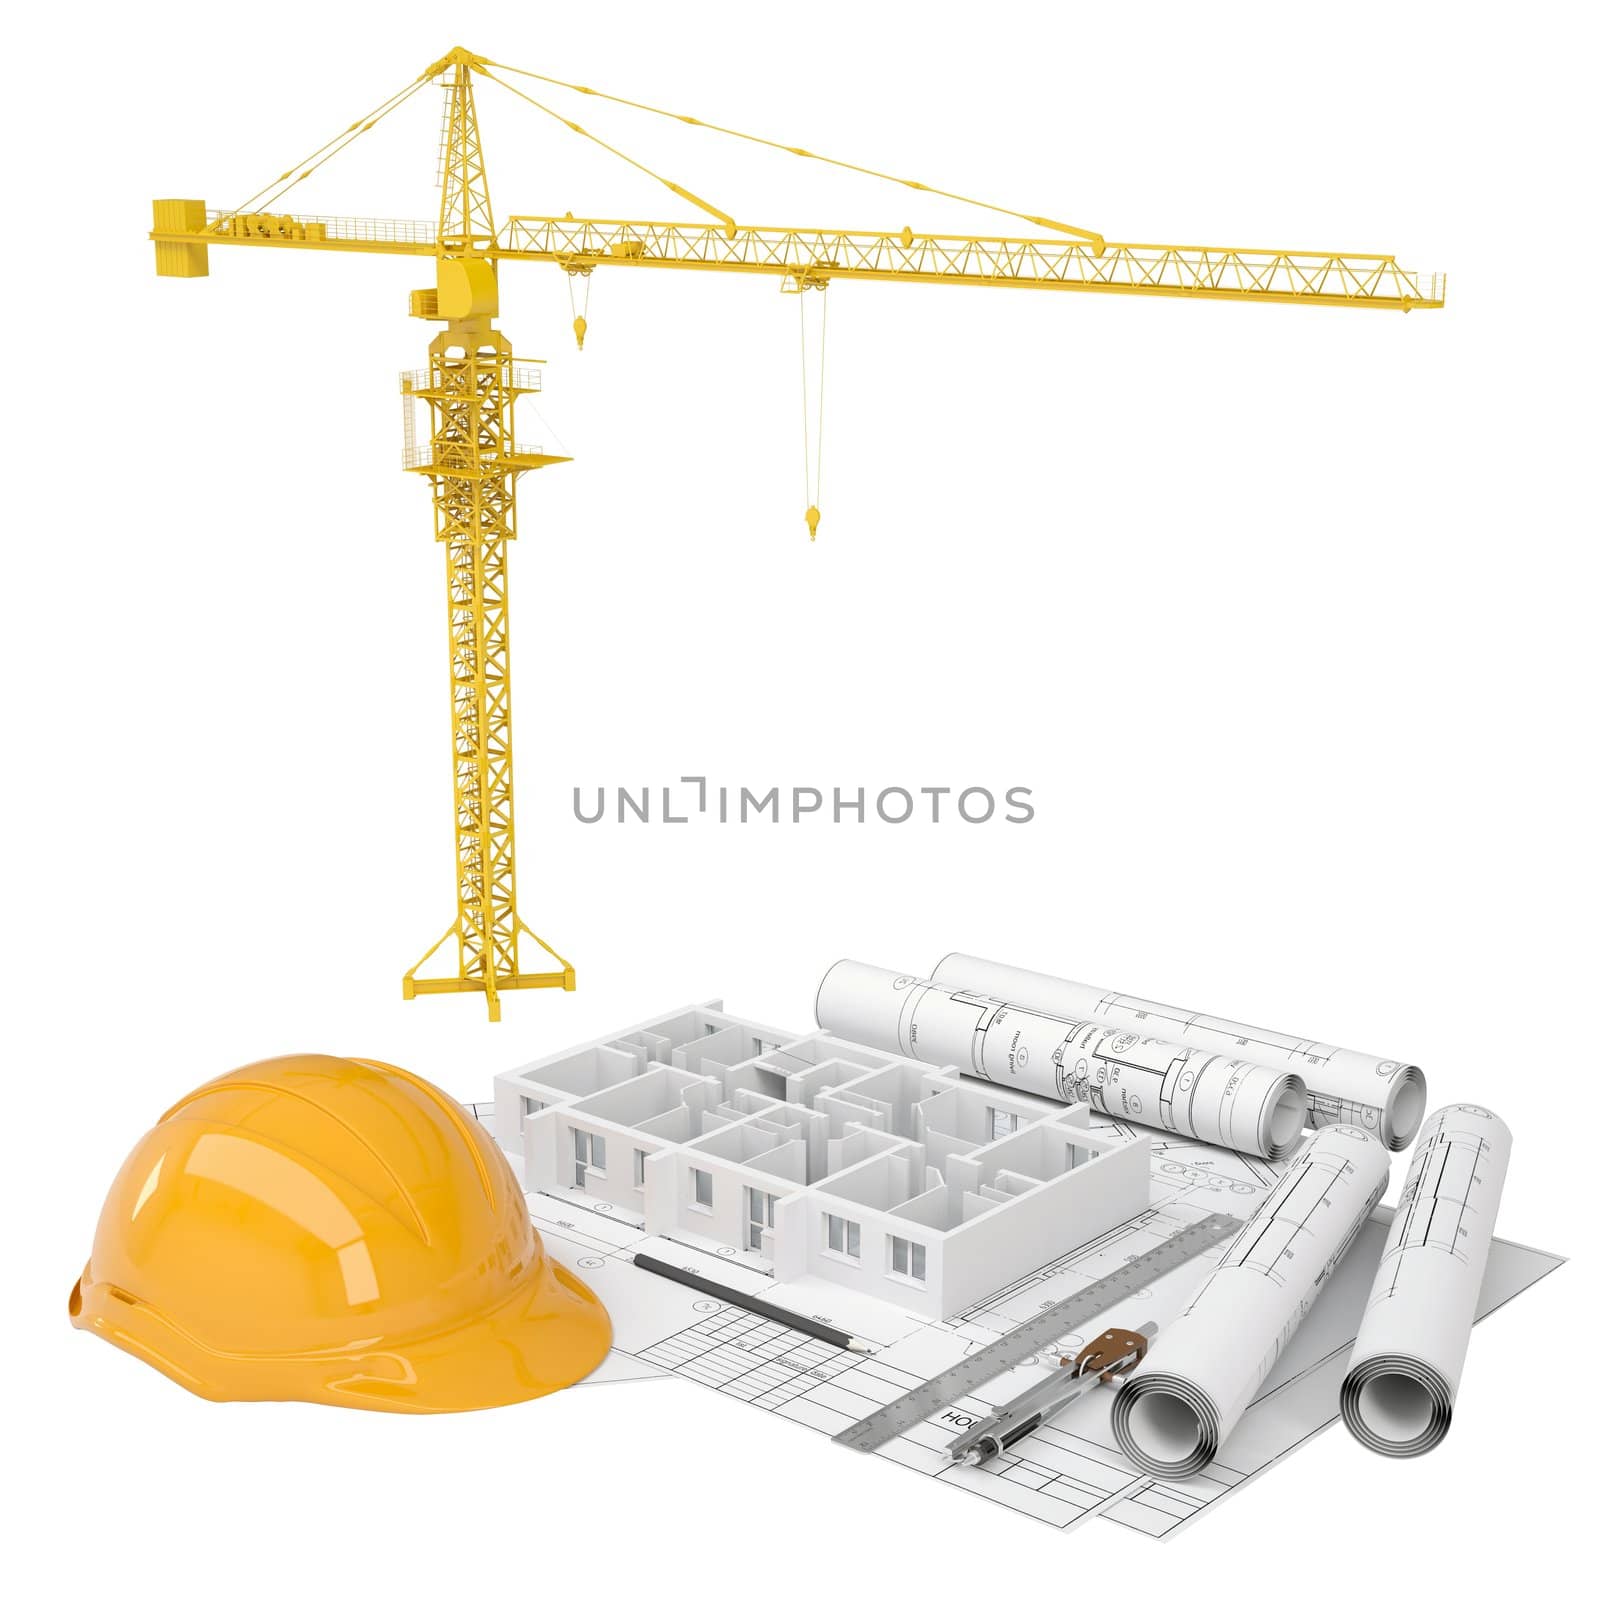 Drawings, tower crane, a helmet and a house under construction by cherezoff